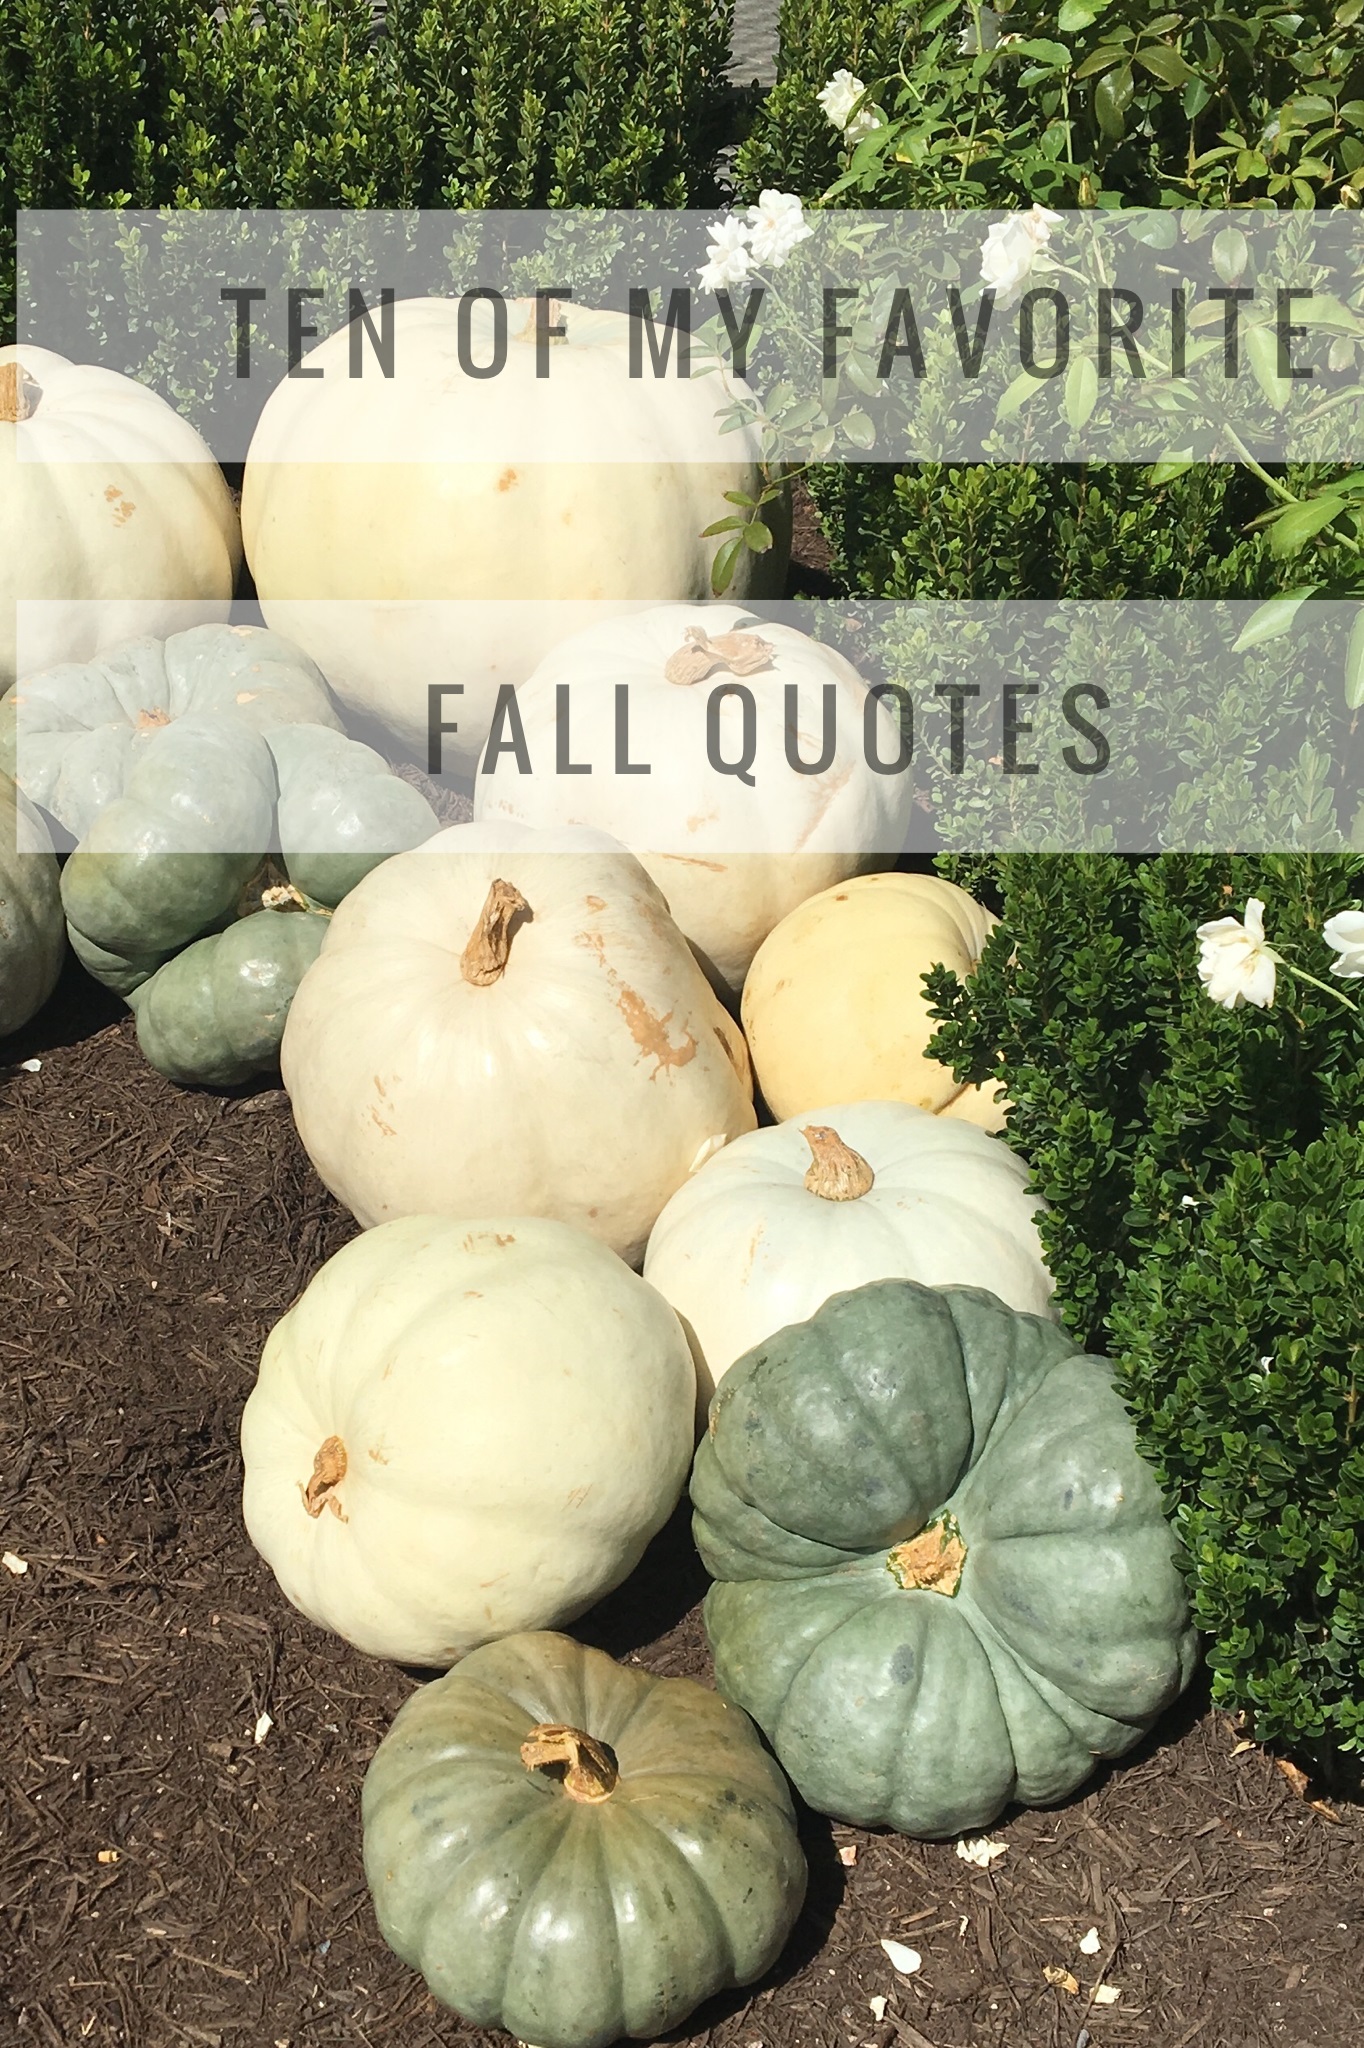 Ten Of My Favorite Fall Quotes